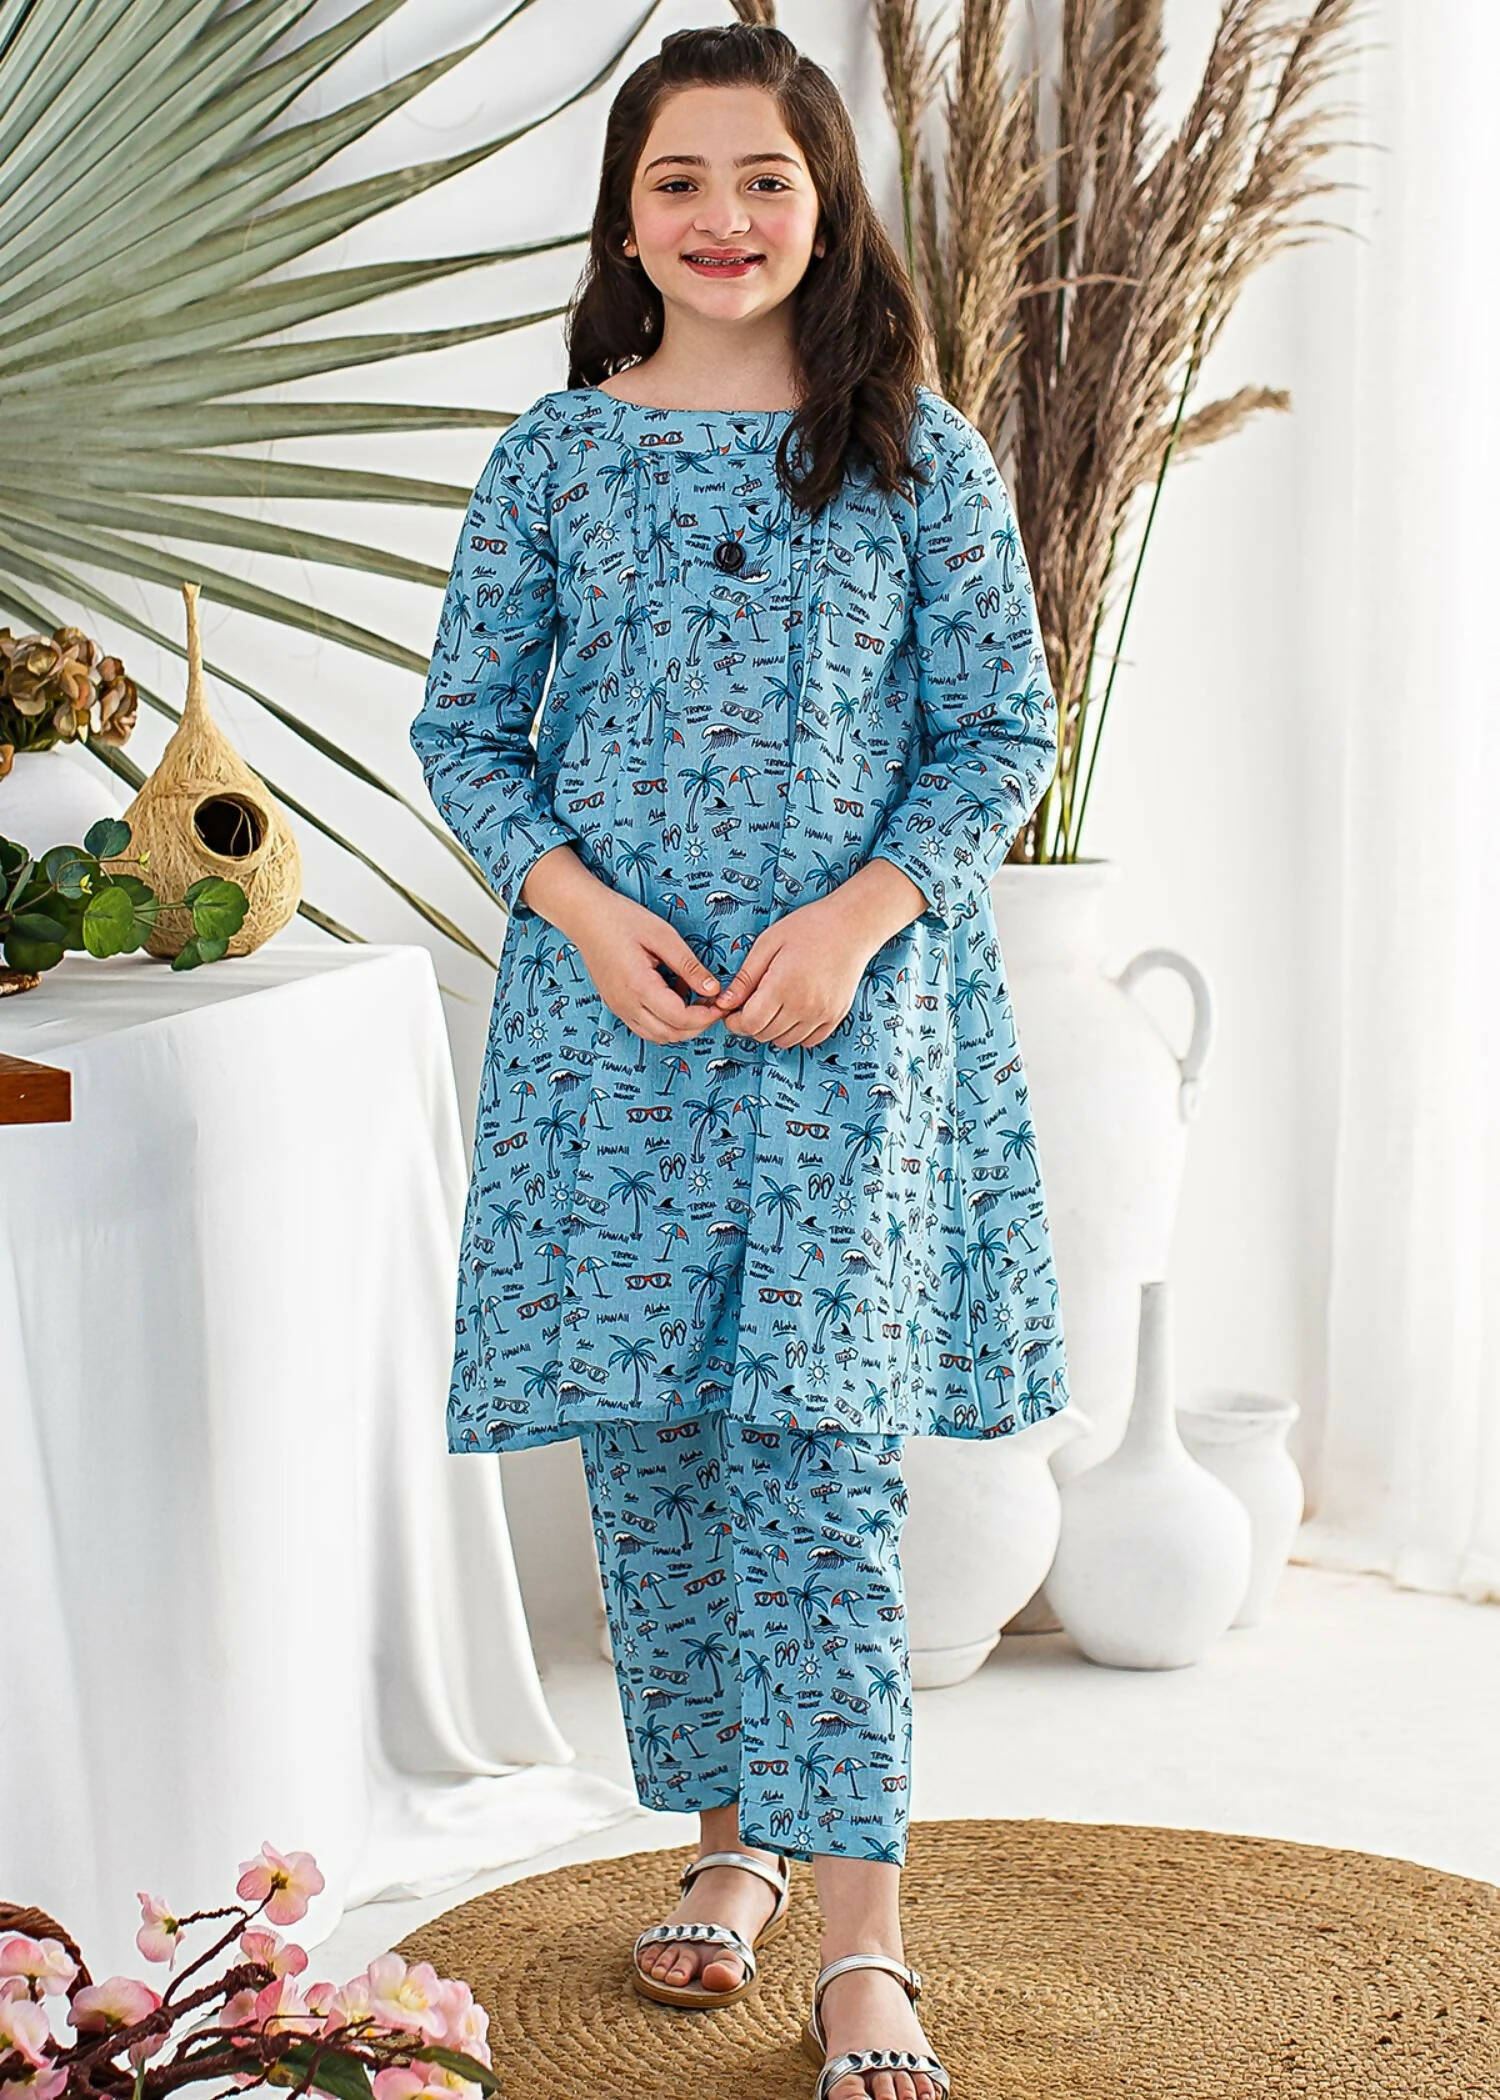 Moonlit Meadows| Girls Shalwar Kameez | All Sizes | Brand New with Tags